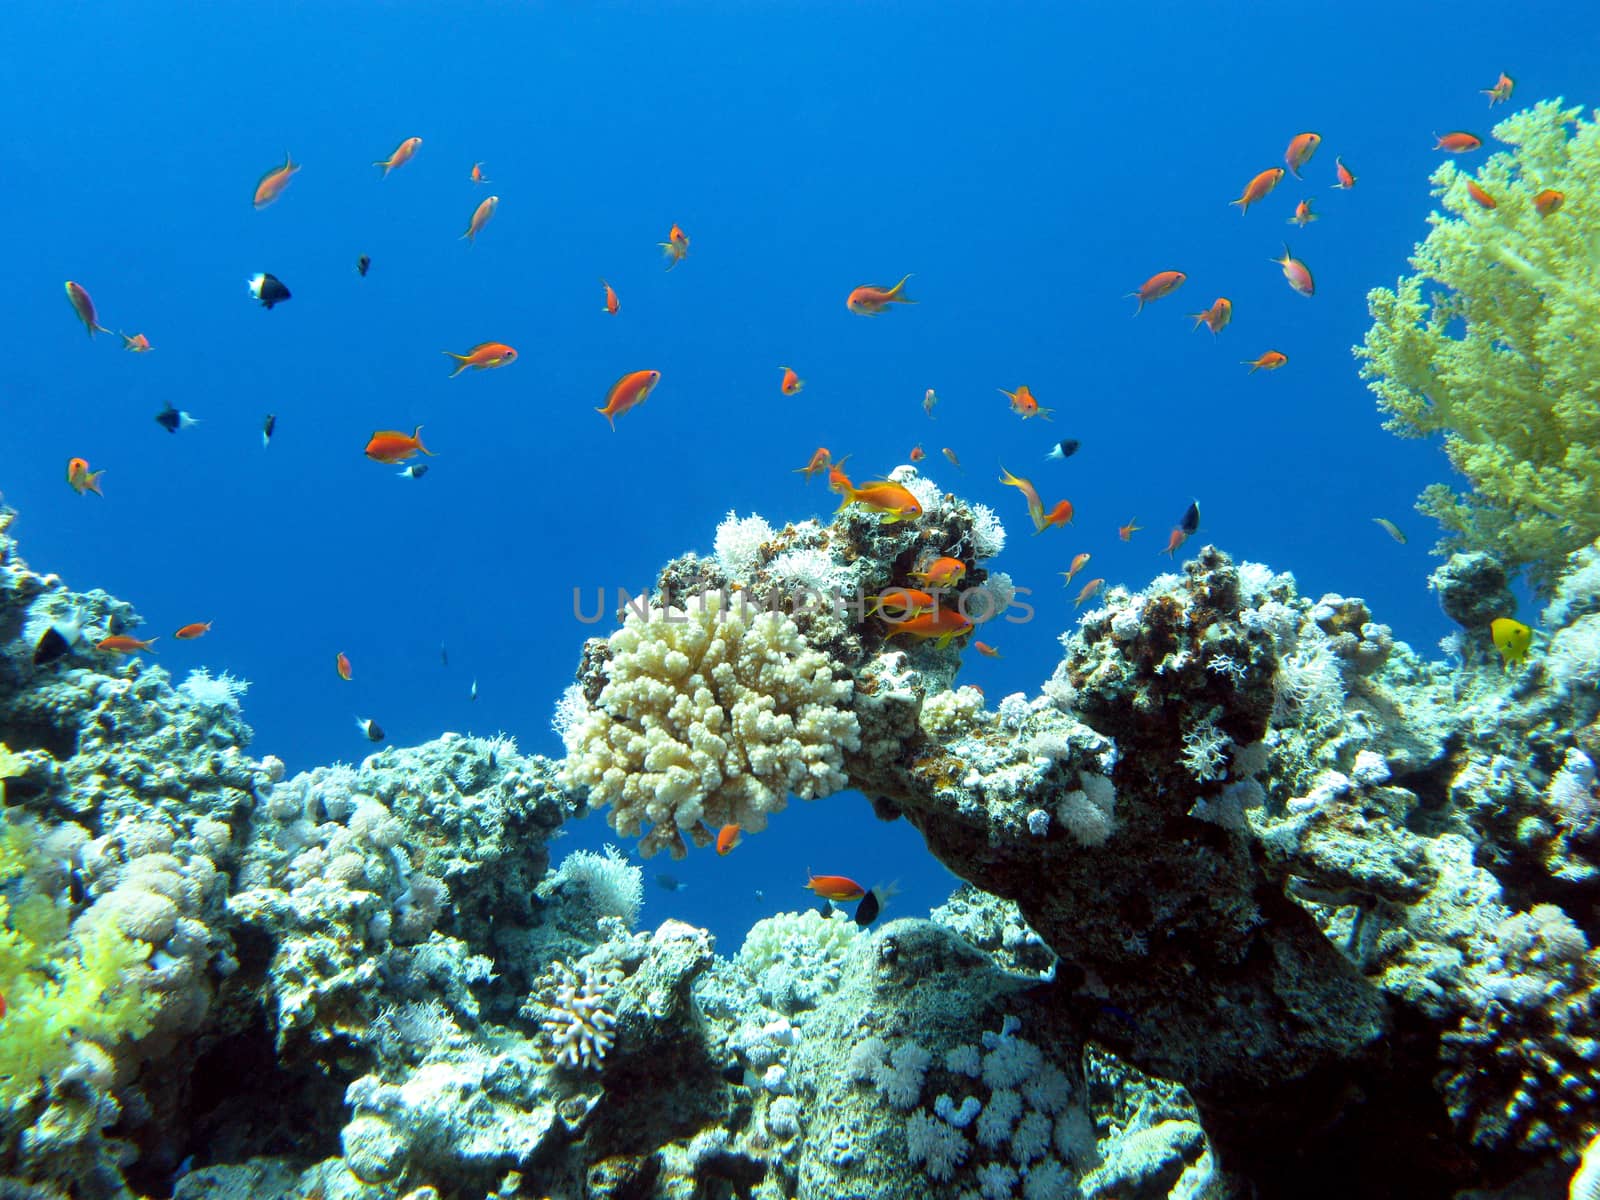 colorful coral reef at the bottom of tropical sea on a background of blue water - underwater life